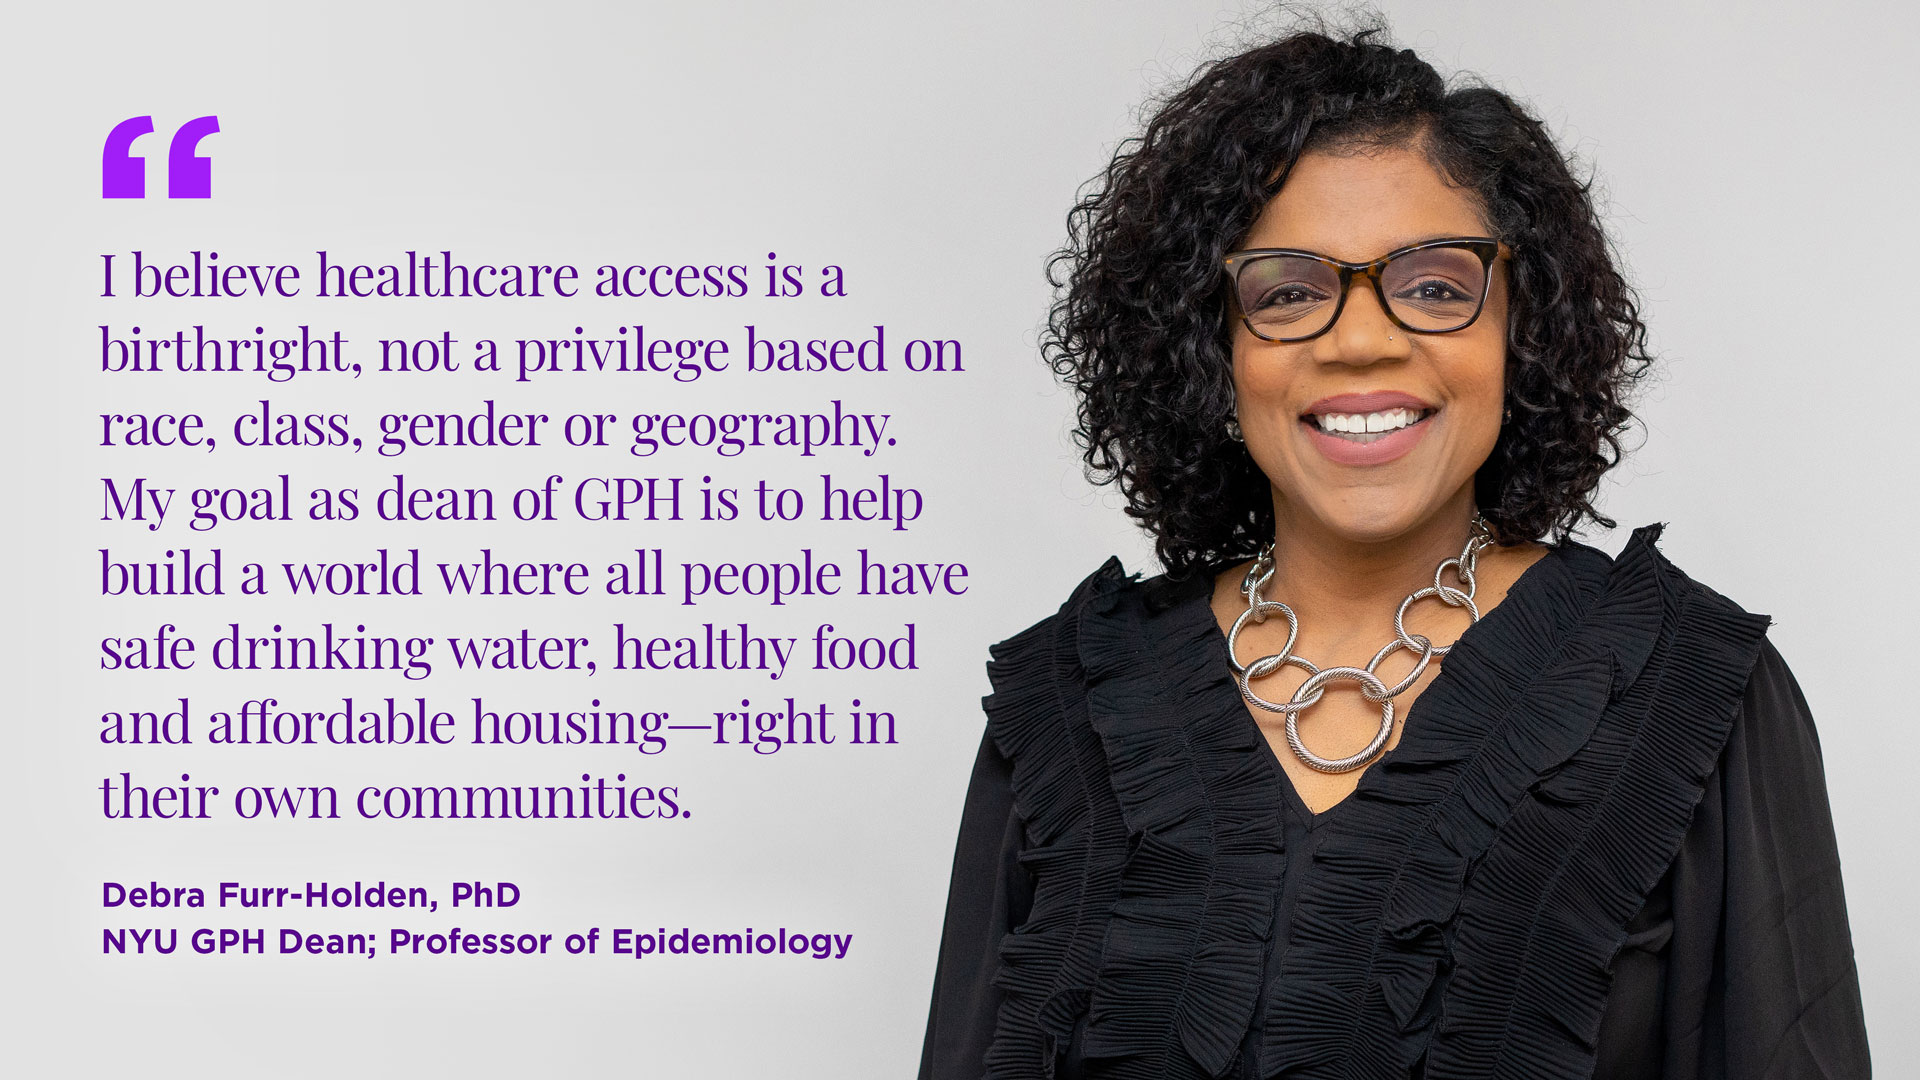 "I believe healthcare access is a birthright, not a privilege based on race, class, gender or geography. My goal as dean of GPH is to help build a world where all people have safe drinking water, healthy food and affordable housing—right in their own communities."  Dr. Debra Furr-Holden NYU GPH Dean